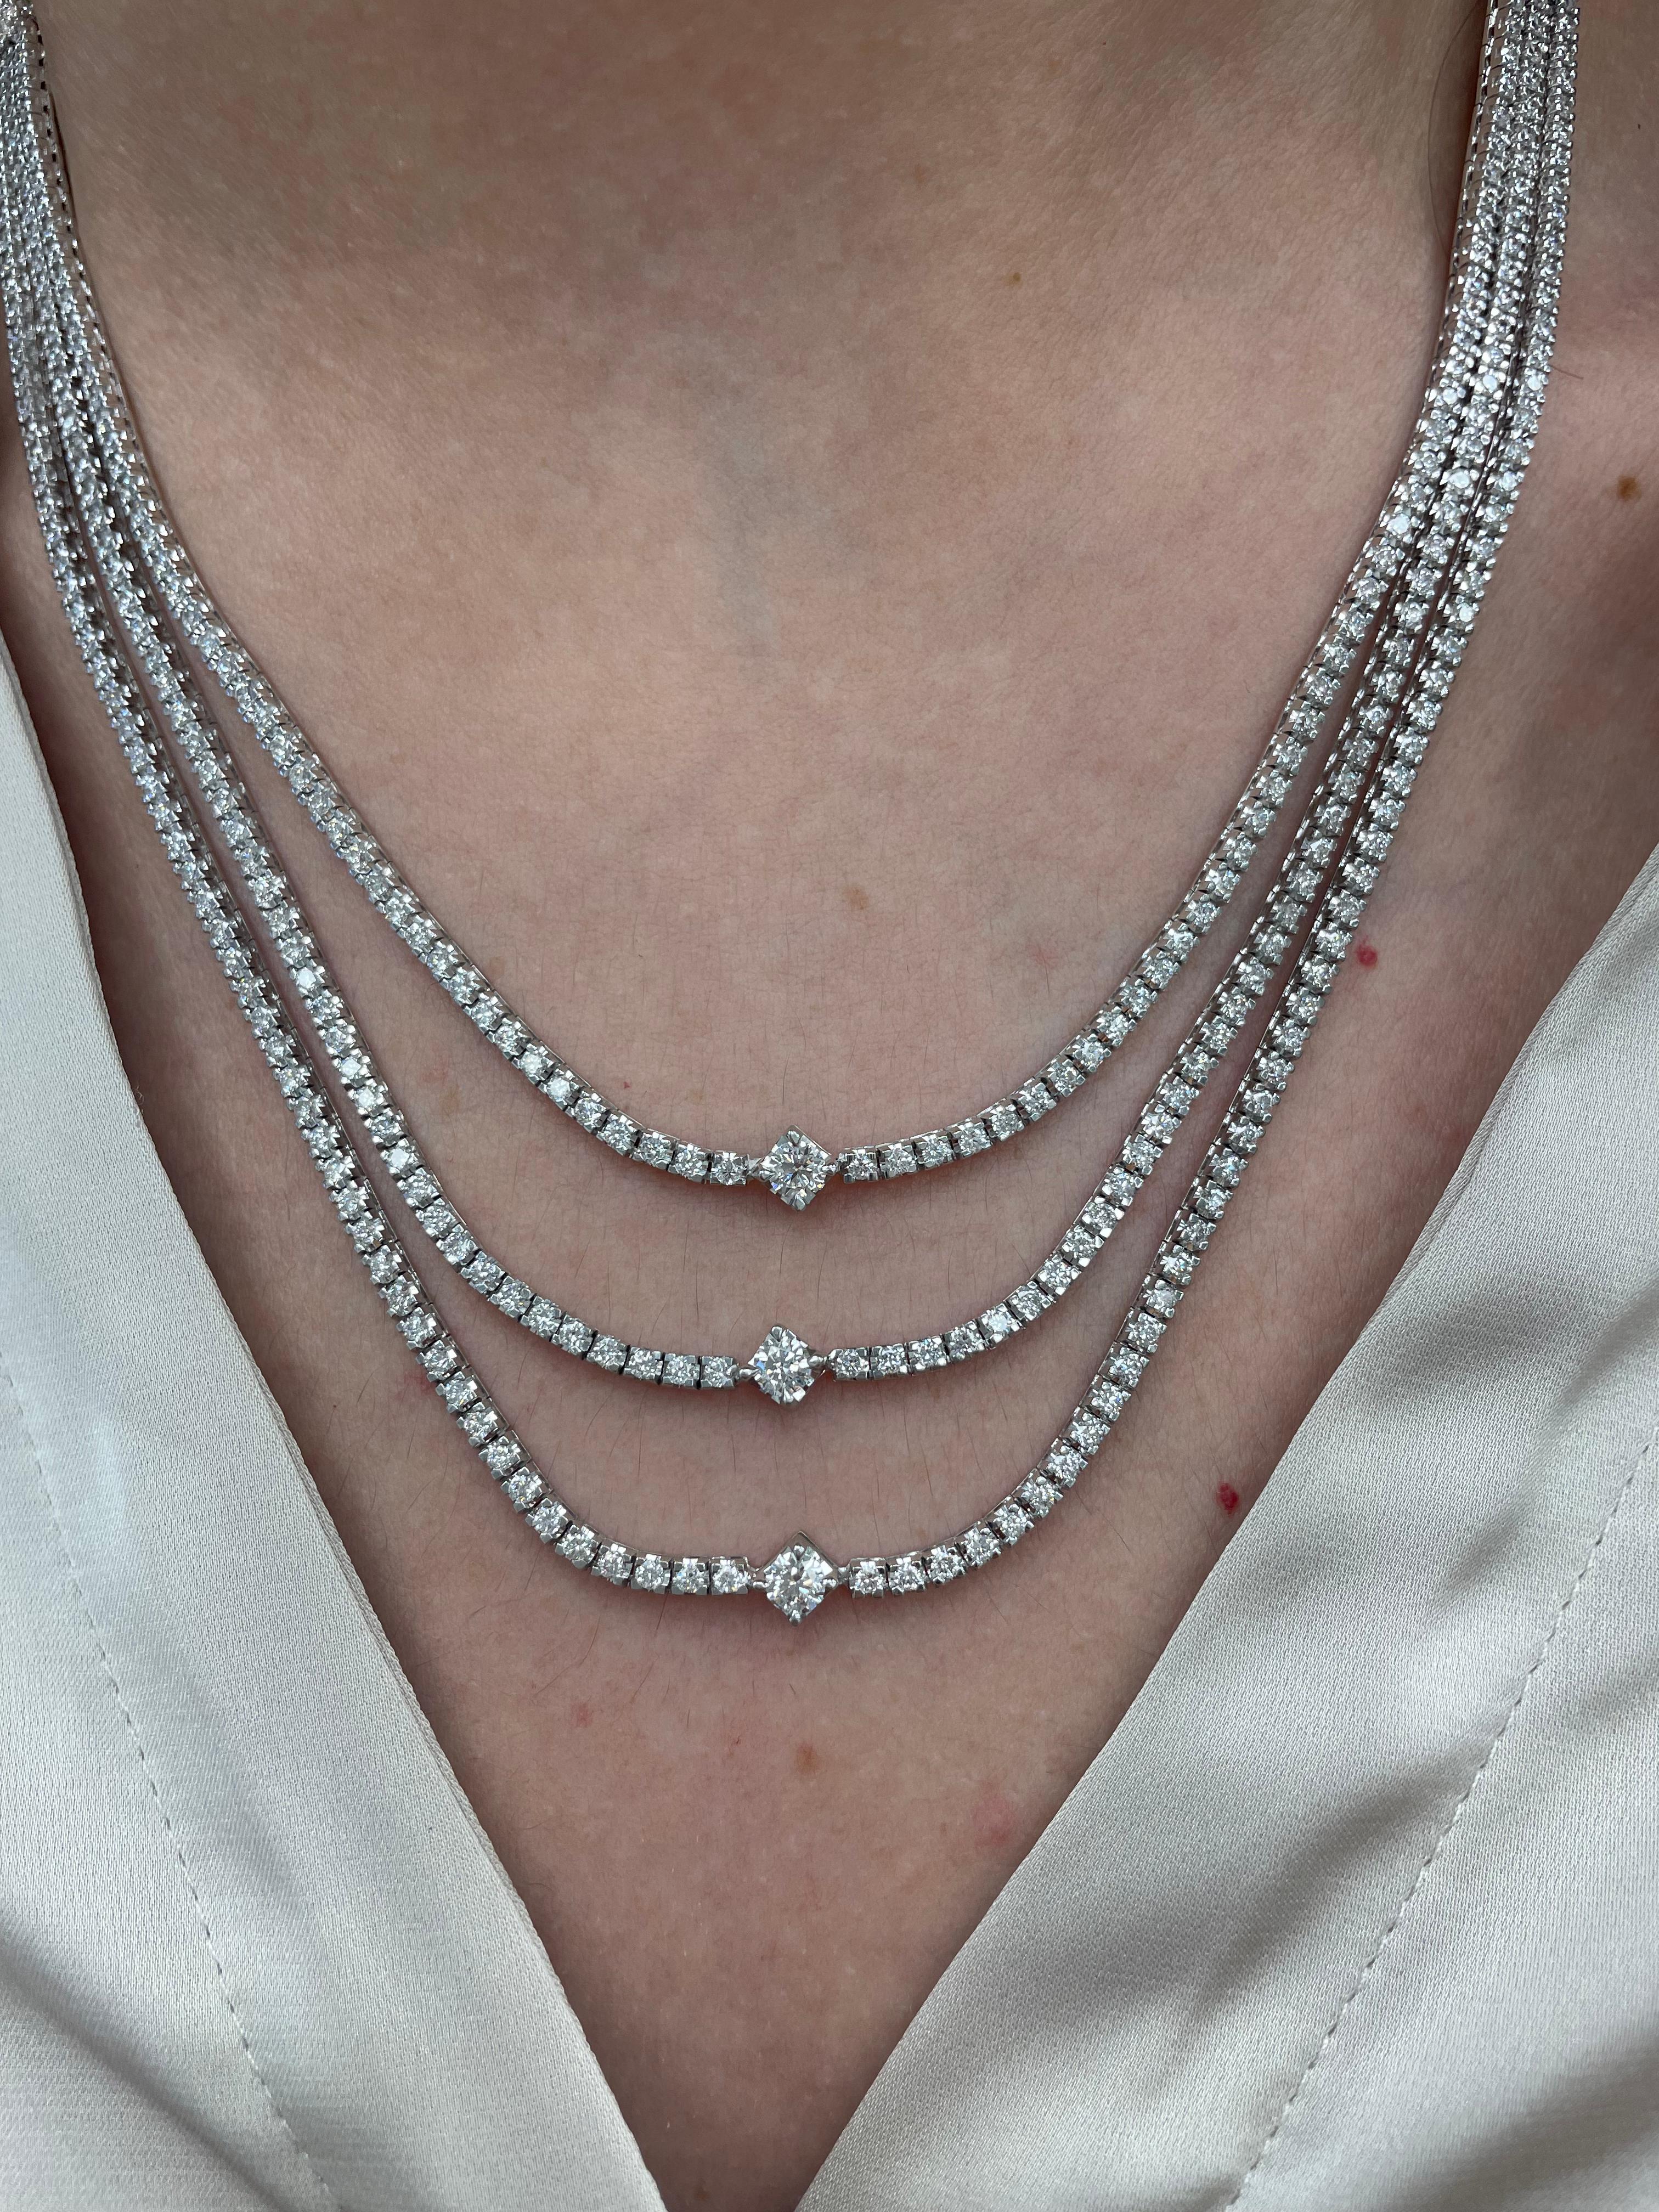 Sensational 3 row diamond tennis necklace. High jewelry by Alexander of Beverly Hills.
9.02 carats total. 
3 larger round brilliant diamonds, 0.72 carats. Along with 443 round brilliant diamonds, 8.30 carats. Approximately D-F color and VS2/SI1